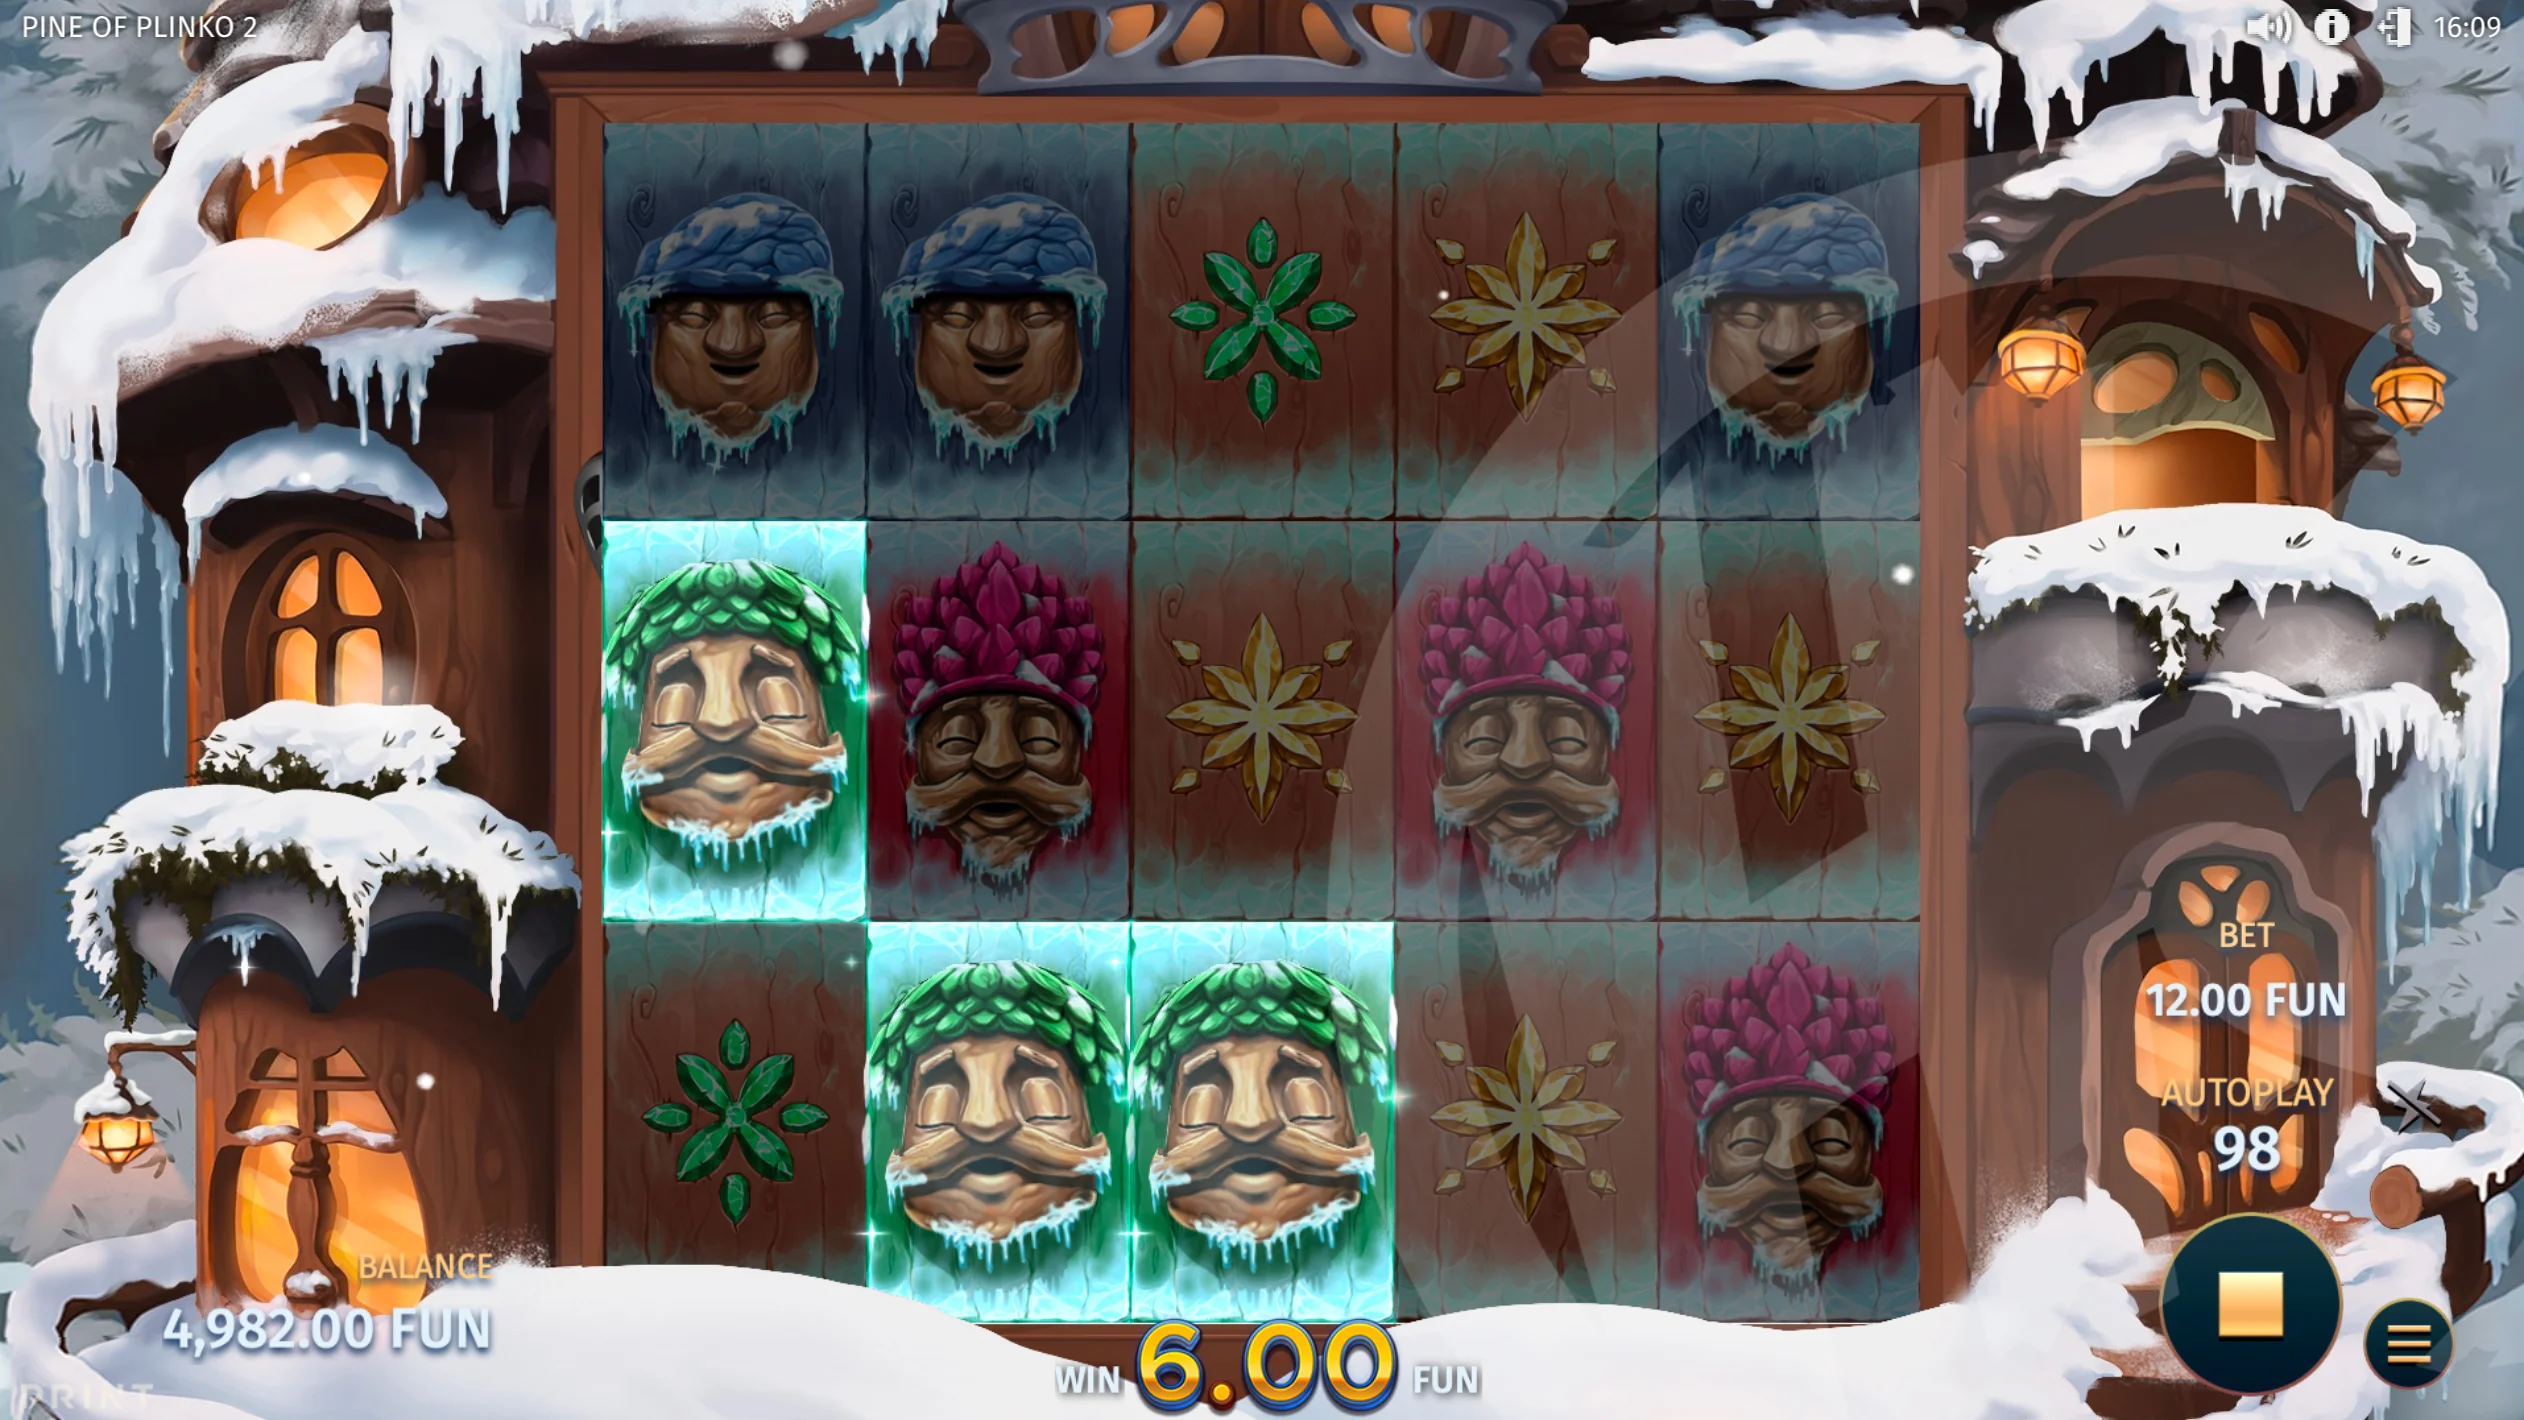 Pine of Plinko 2 Offers Players 10 Fixed Win Lines